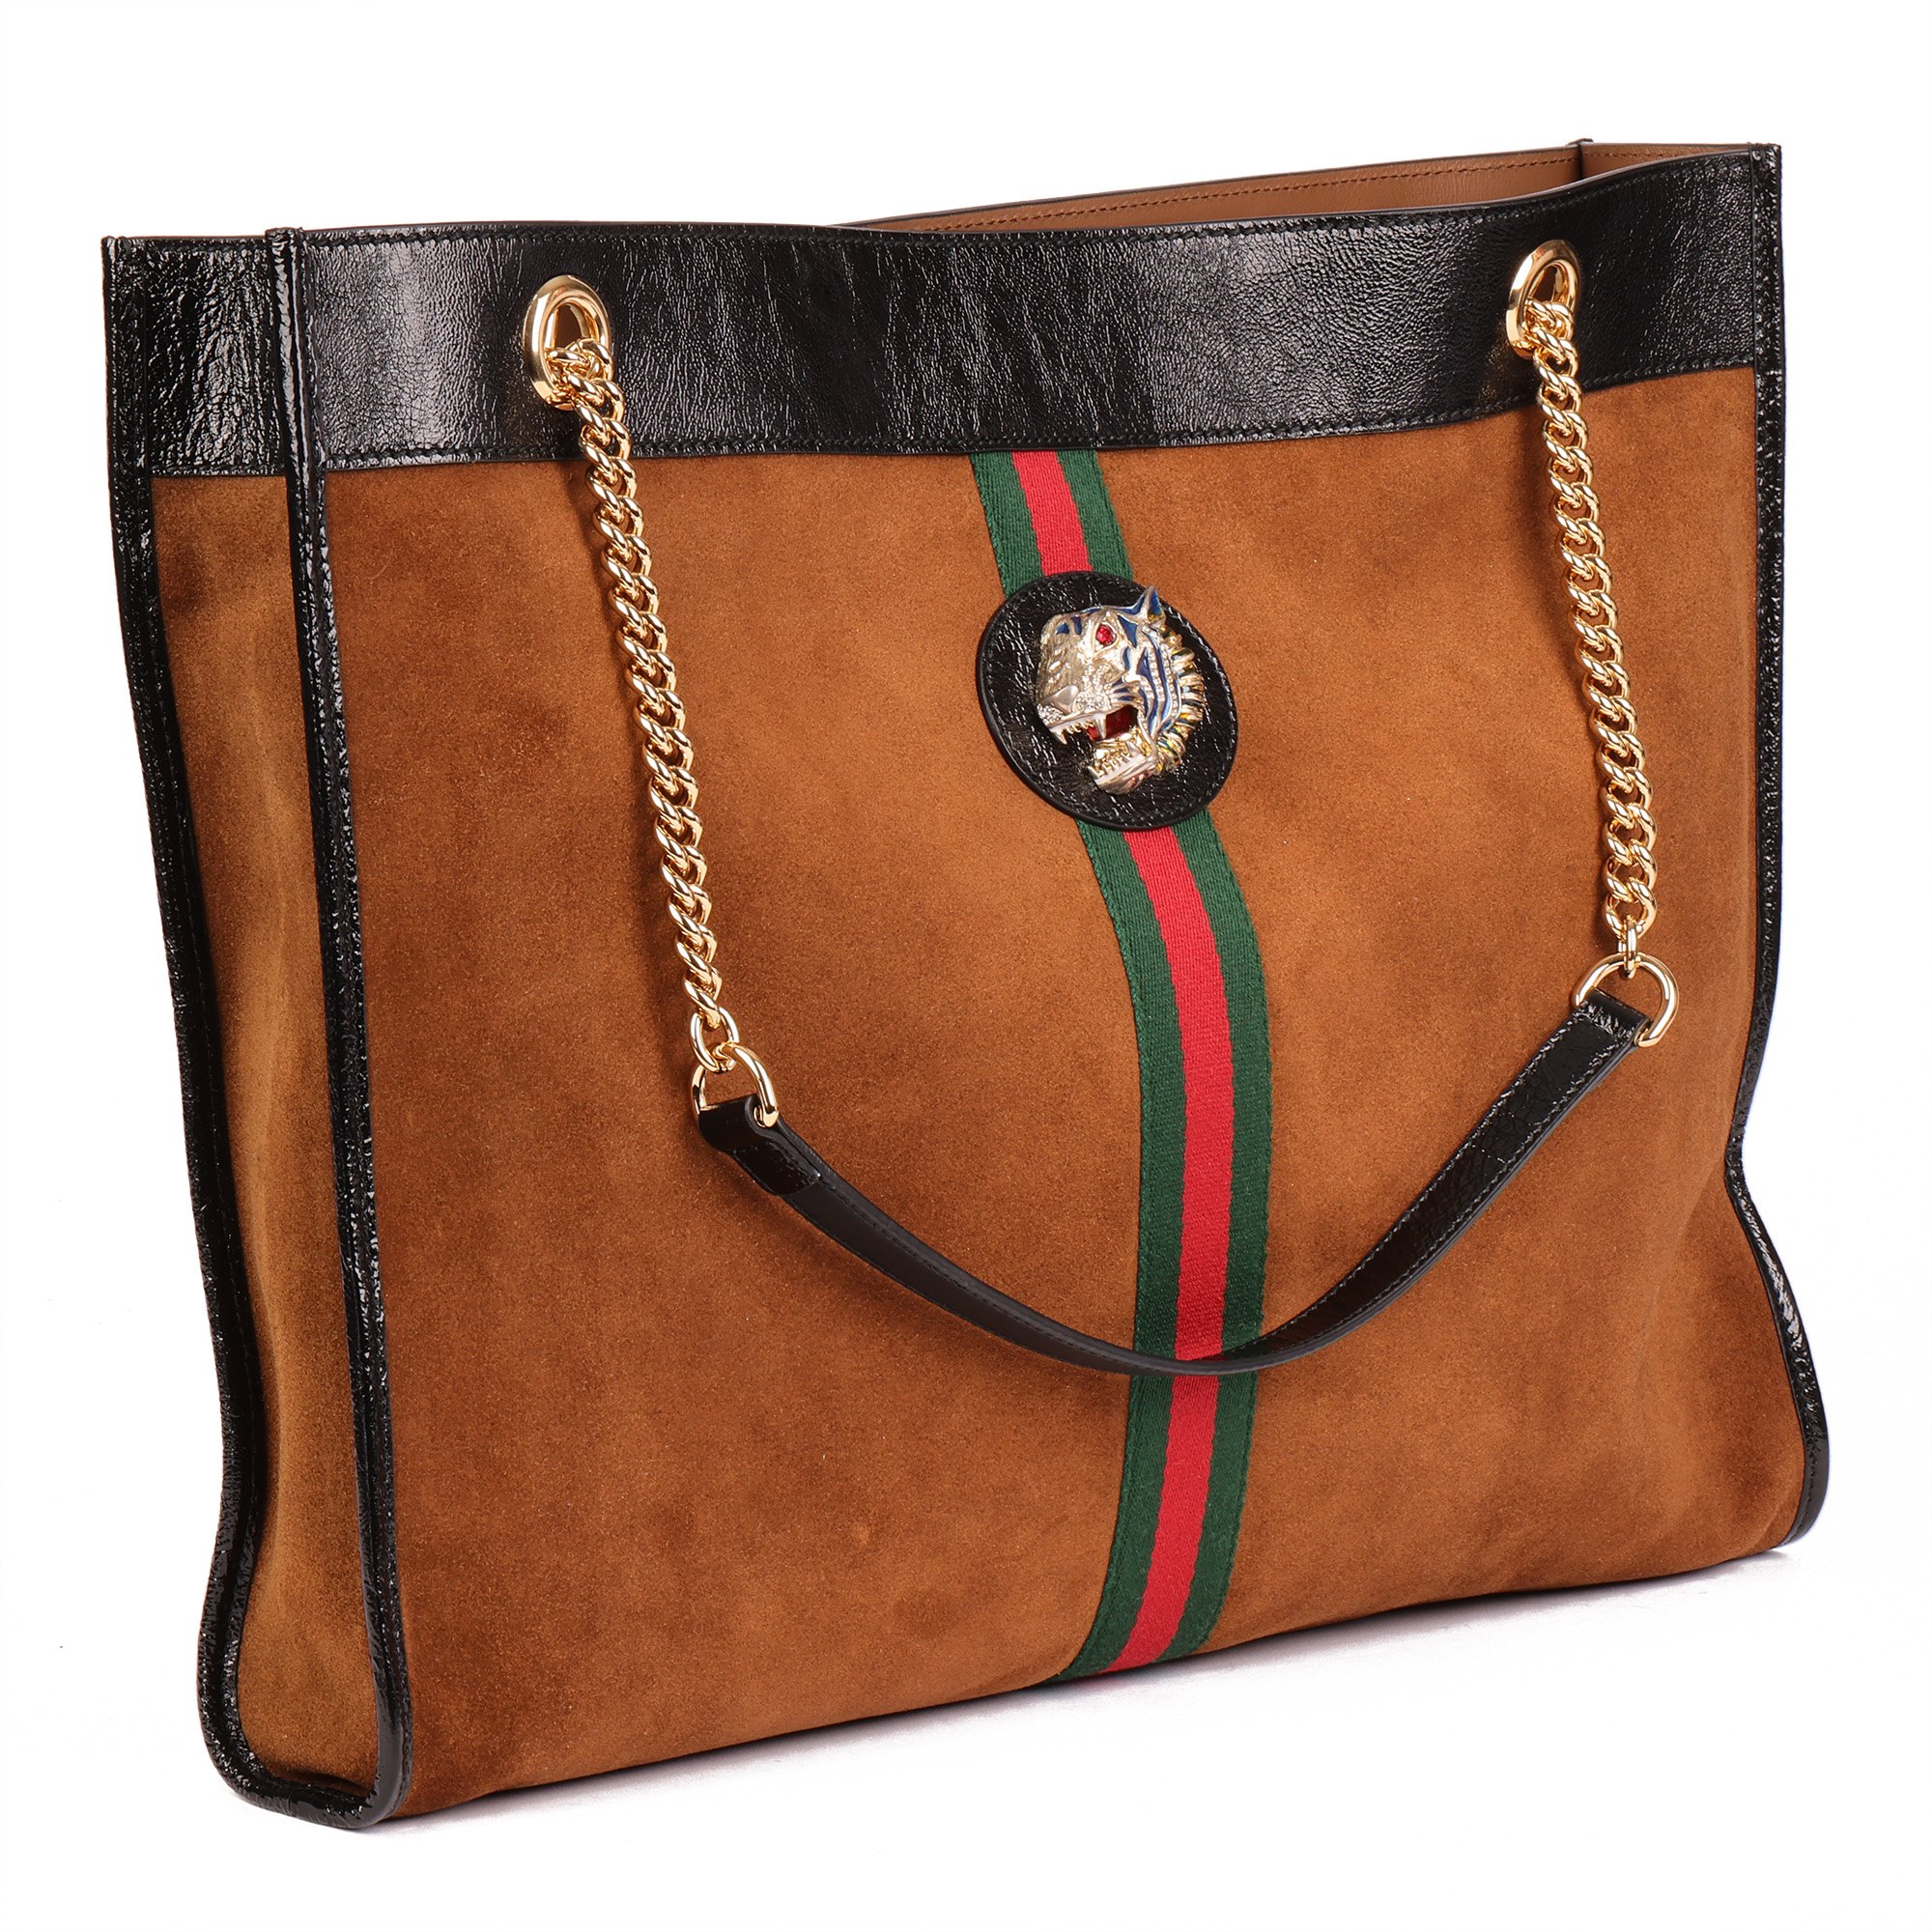 Gucci Brown Suede & Black Patent Leather Maxi Rajah Tote